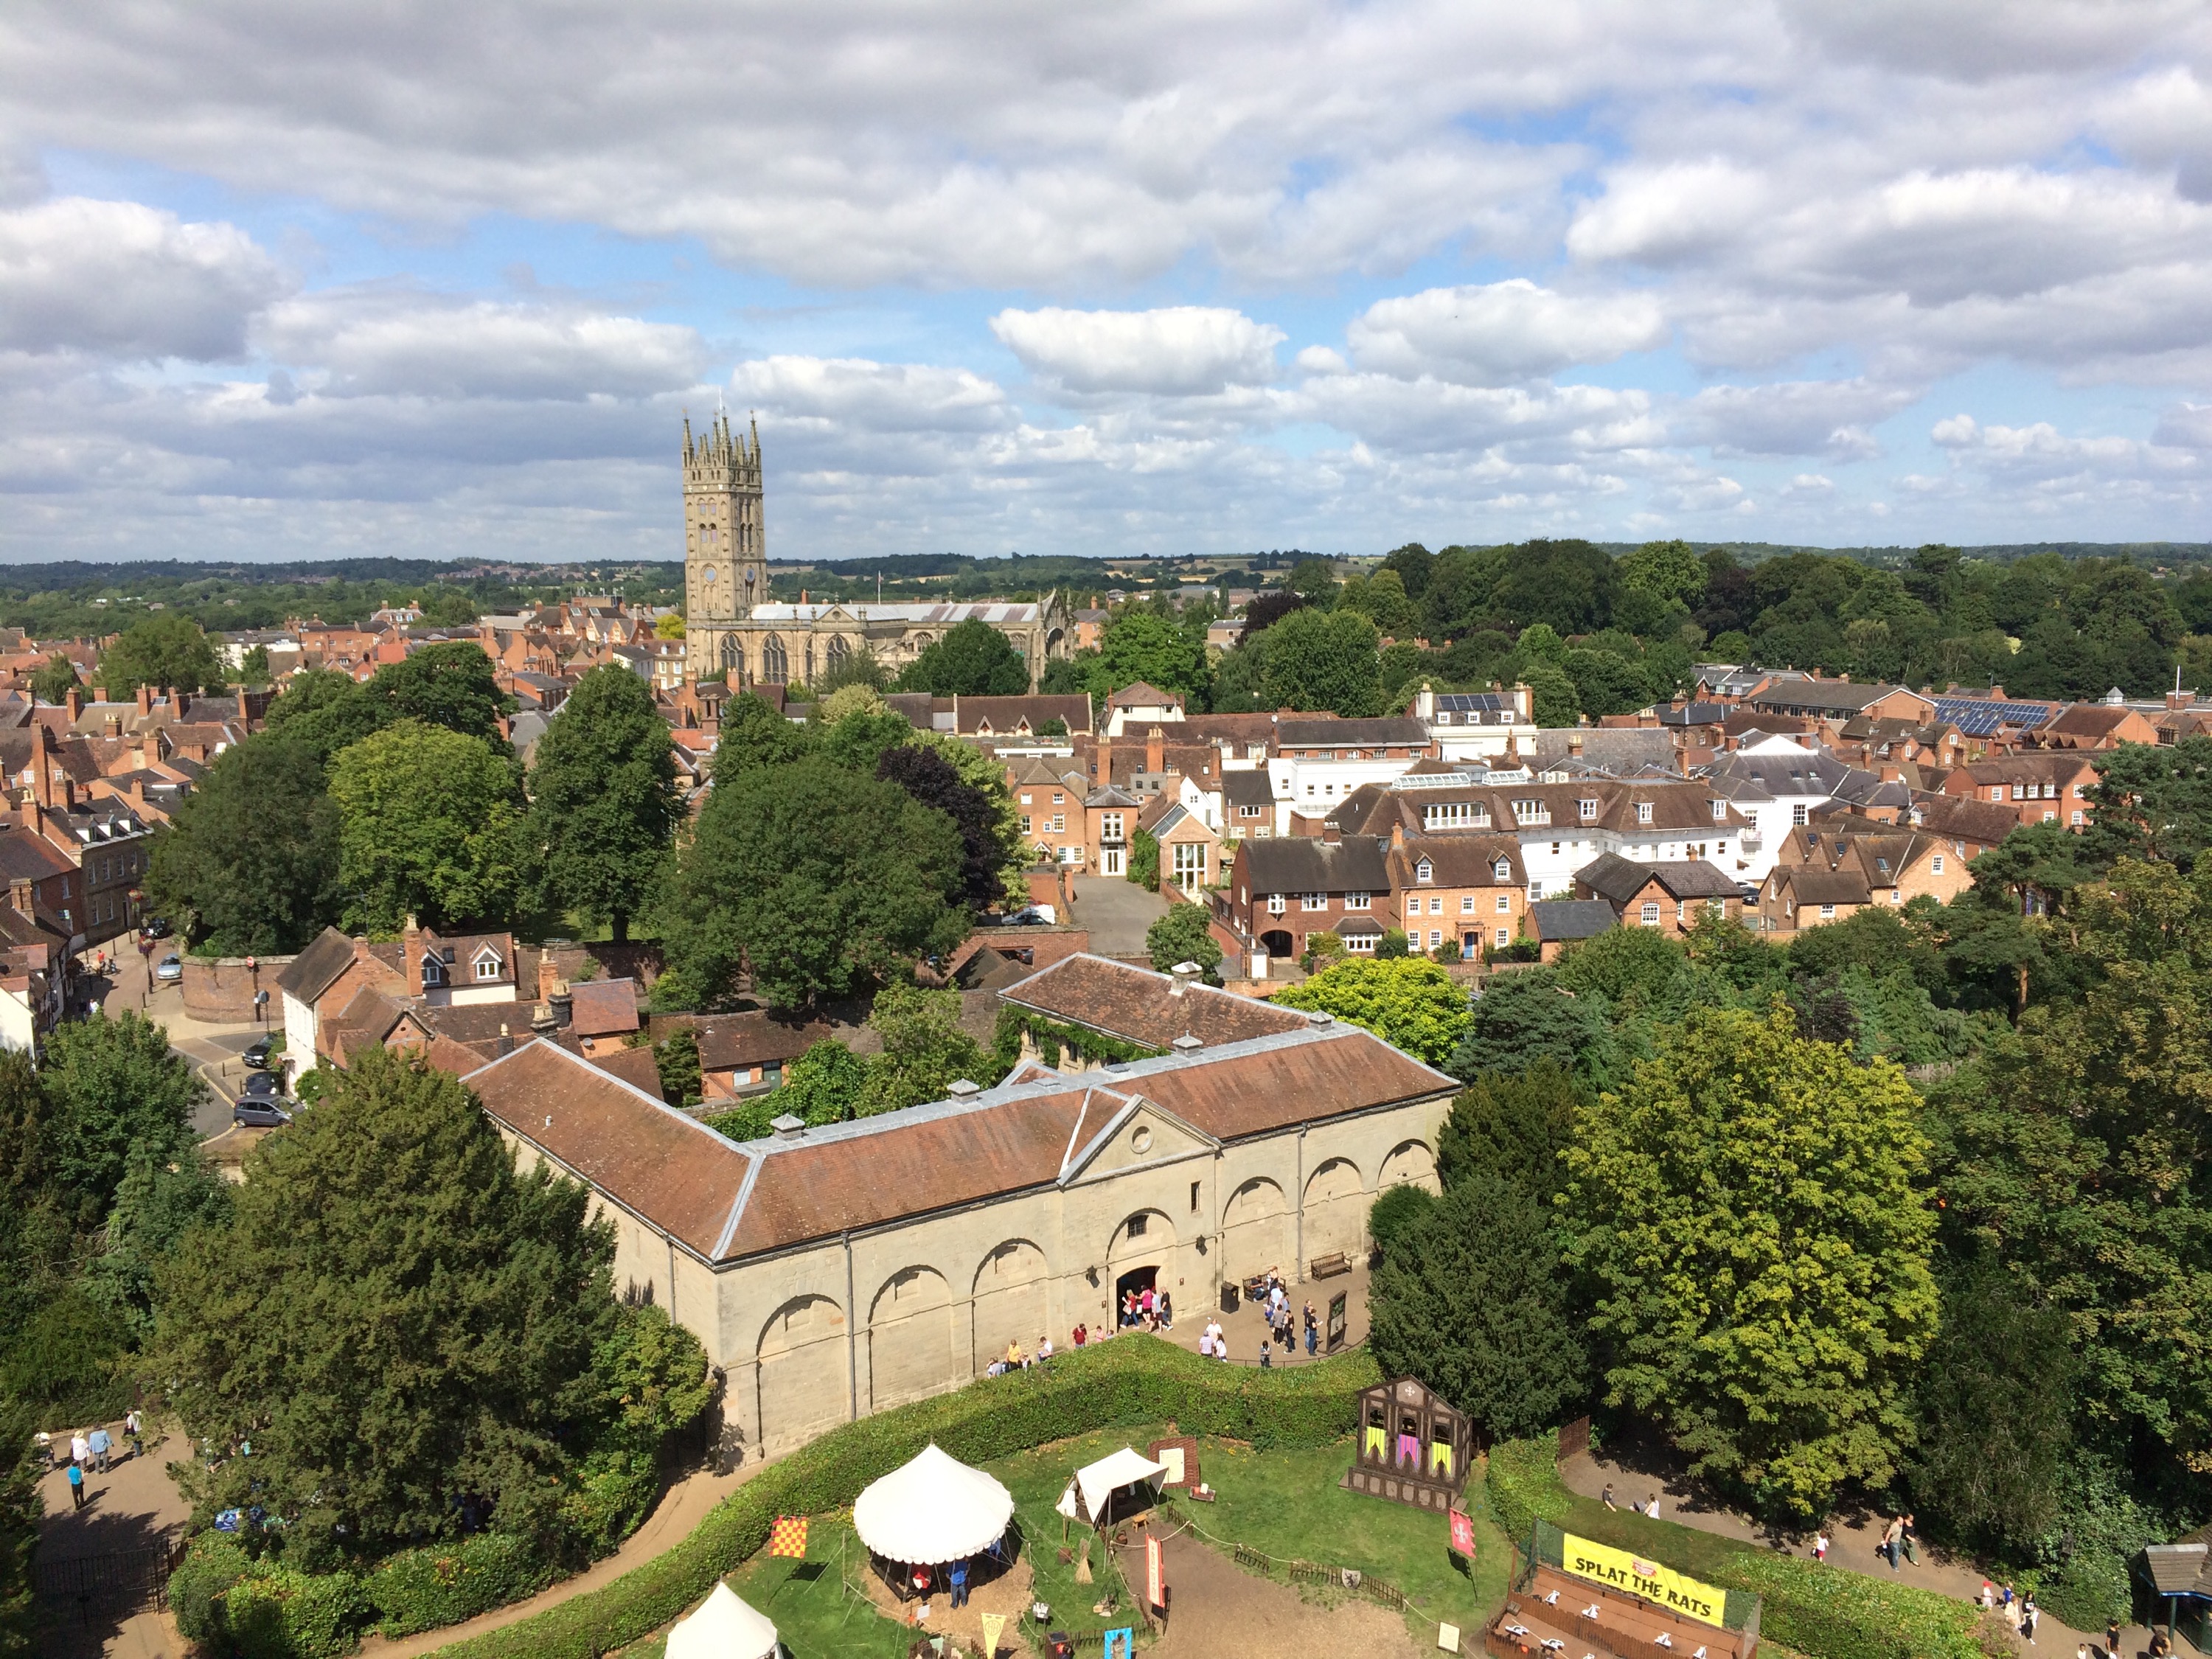 View of the Warwick skyline from the top of Warwick Castle